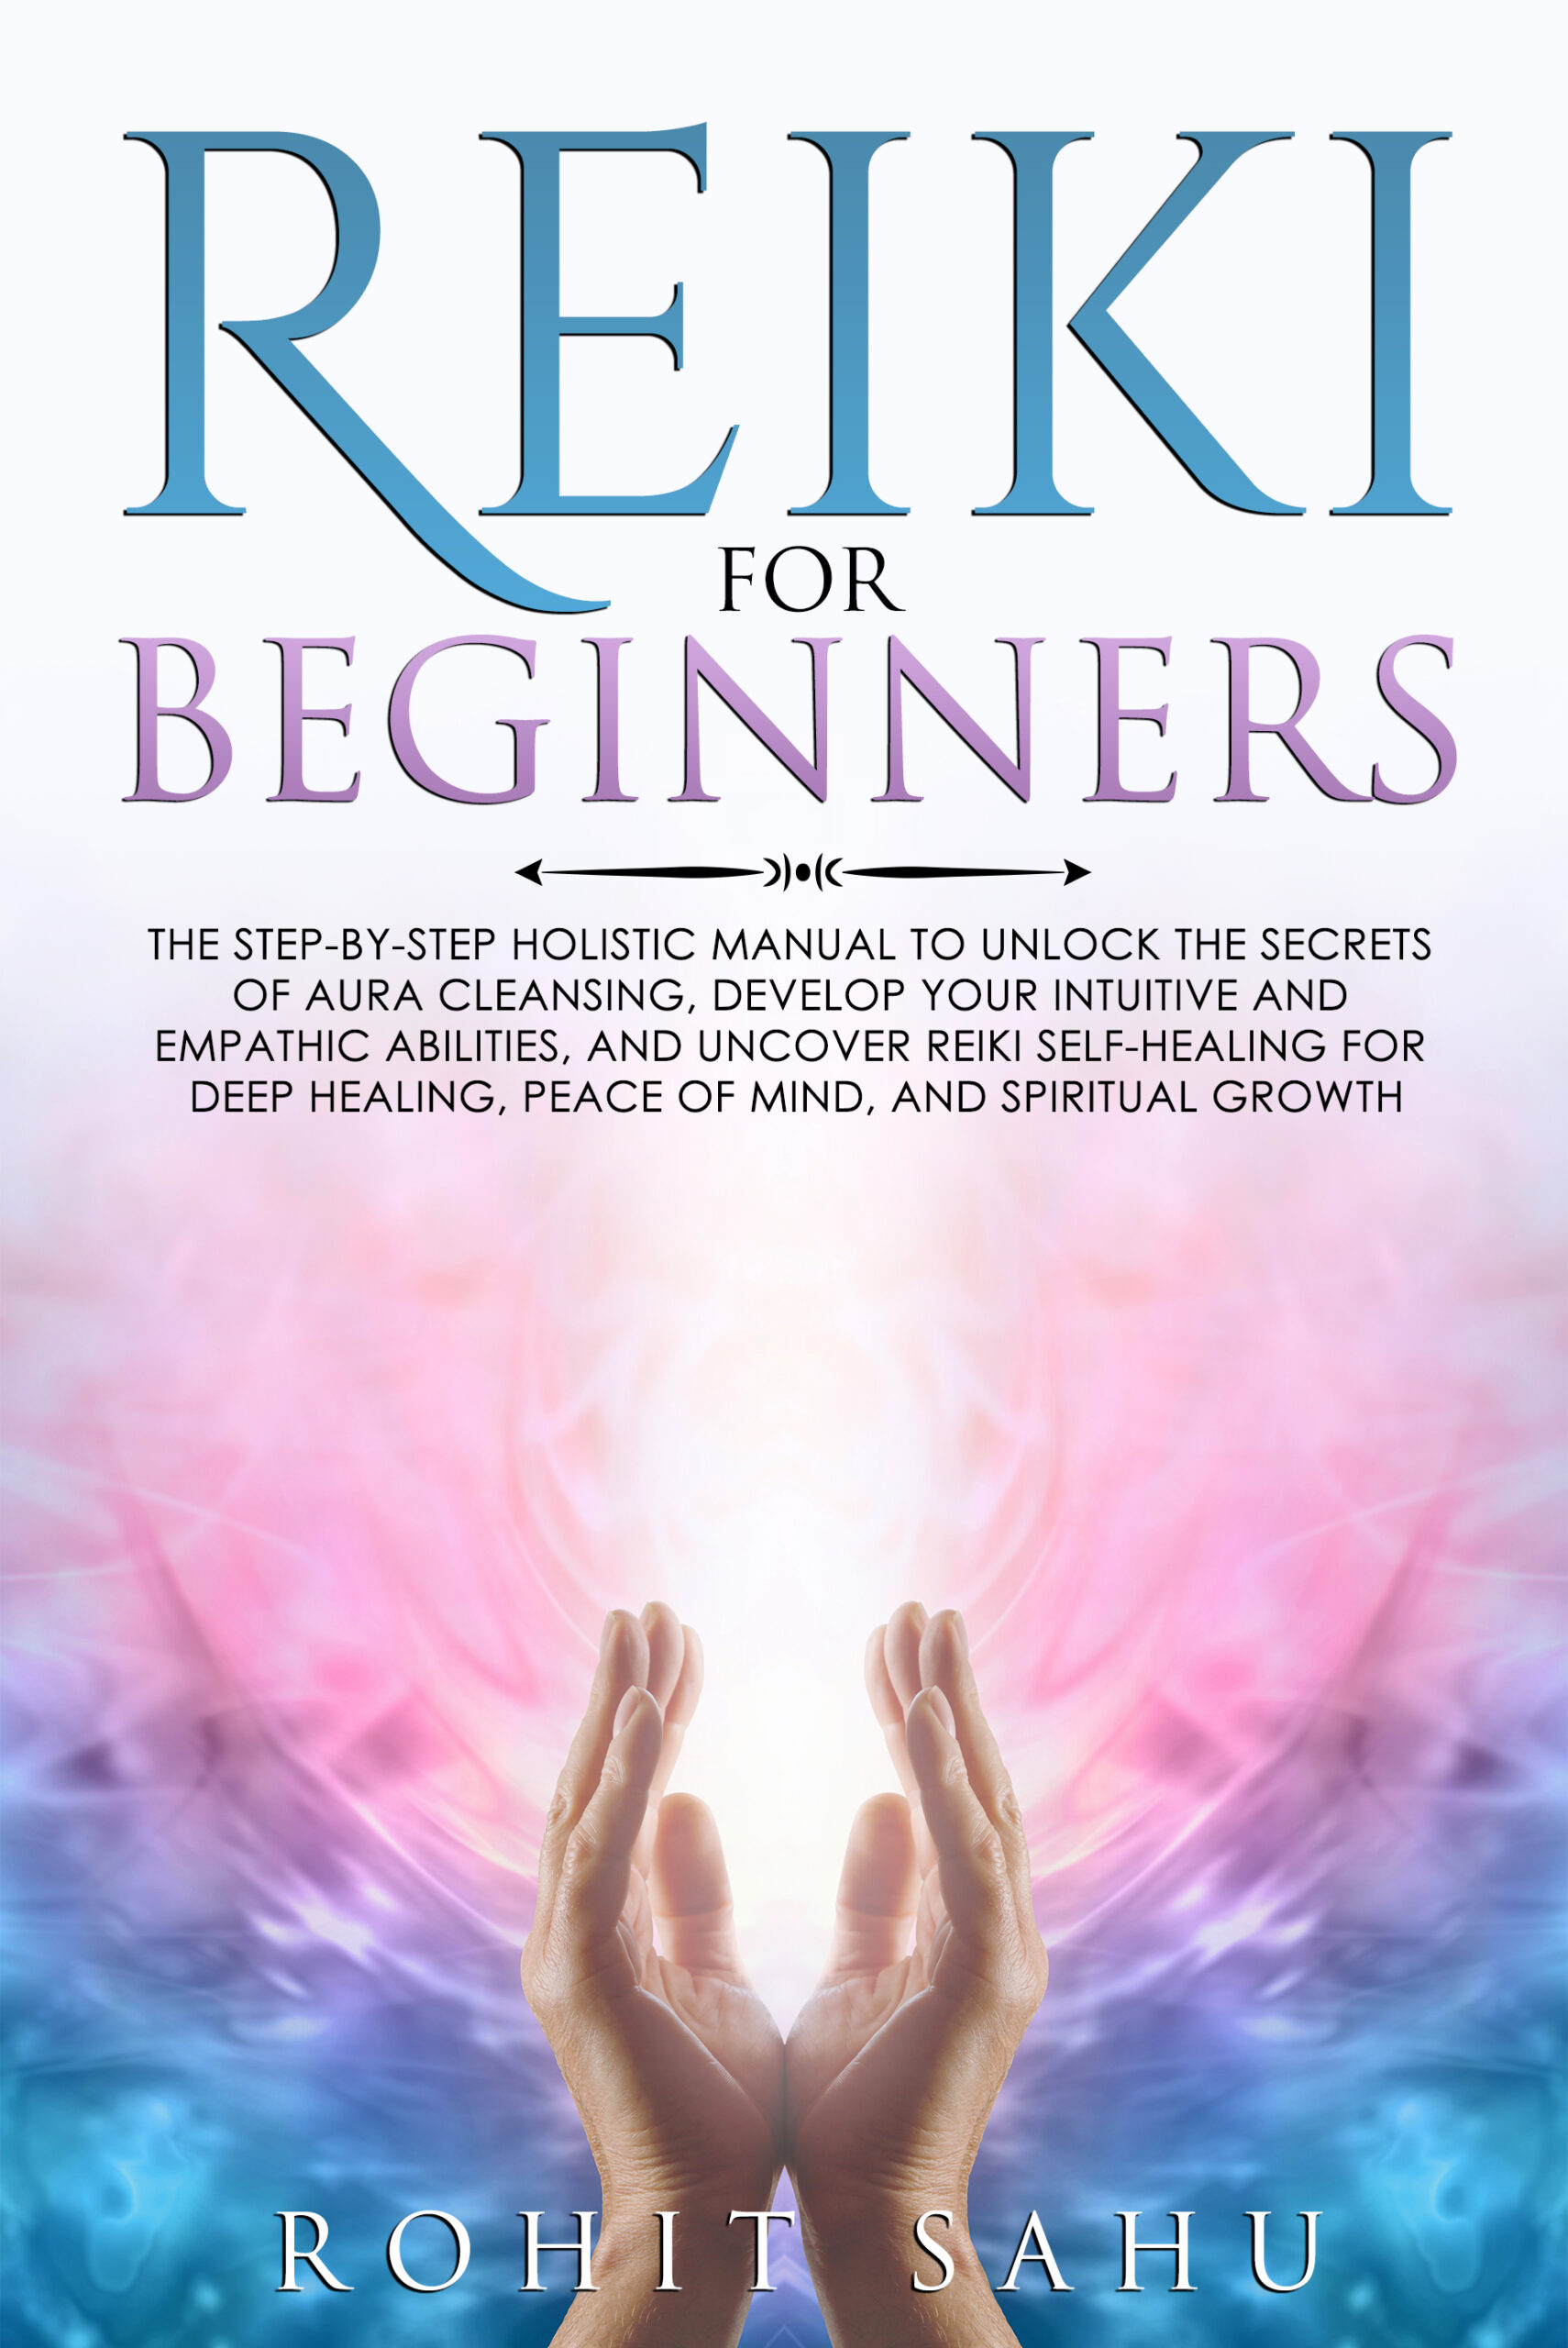 FREE: Reiki For Beginners: The Step-by-Step Guide to Unlock Reiki Self-Healing and Aura Cleansing Secrets for Deep Healing, Peace of Mind, and Spiritual Growth by Rohit Sahu